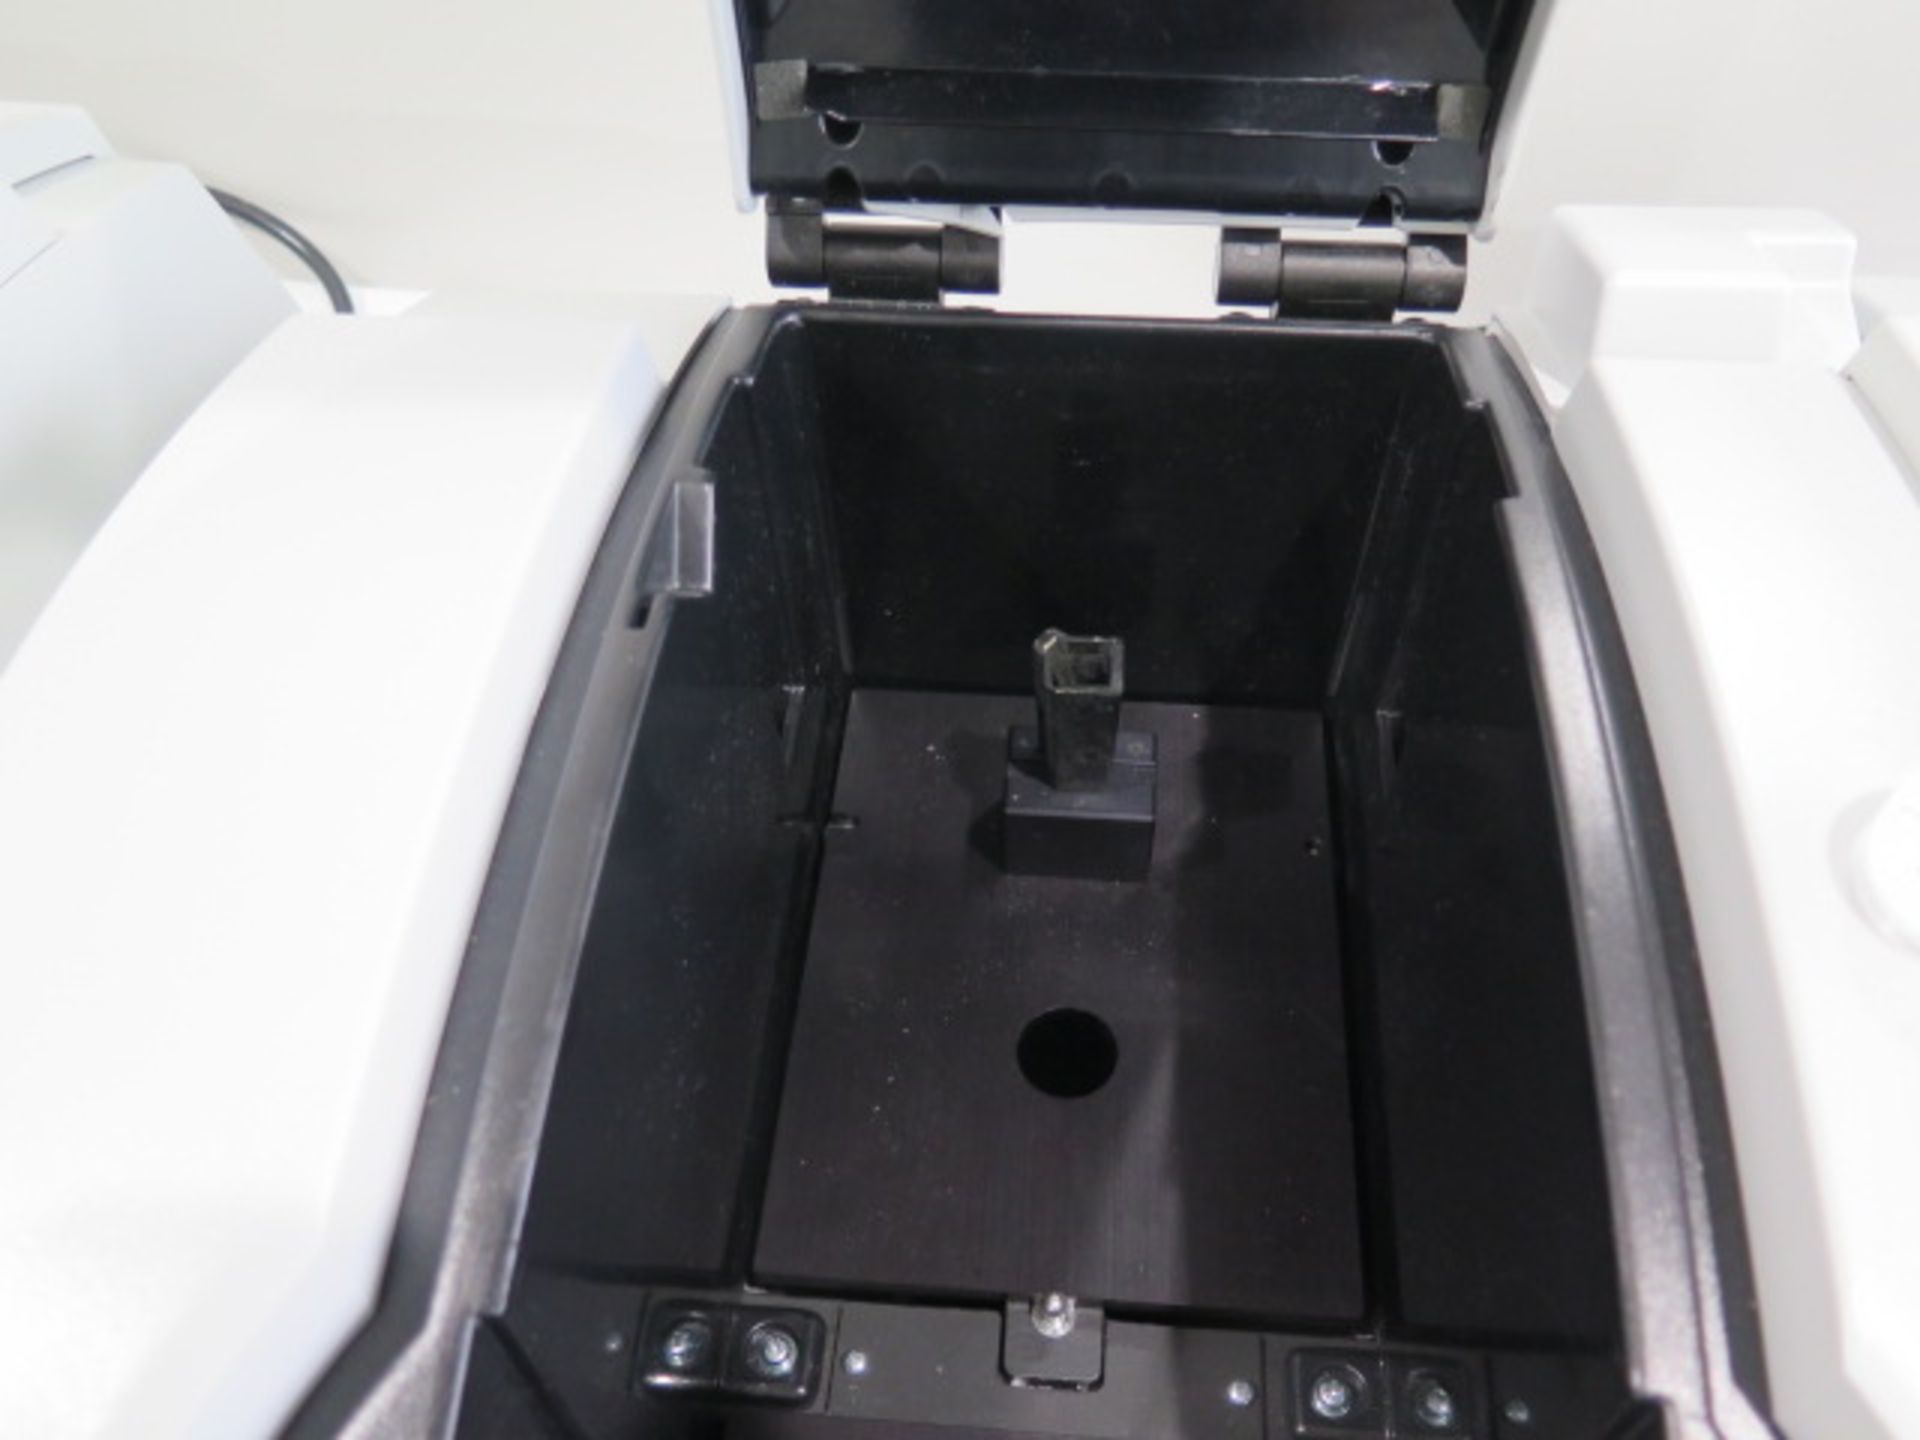 Thermo Scientific Evolution 300 UV-VIS Spectrophotometer s/n EVOU308001 (SOLD AS-IS - NO WARRANTY) - Image 6 of 8